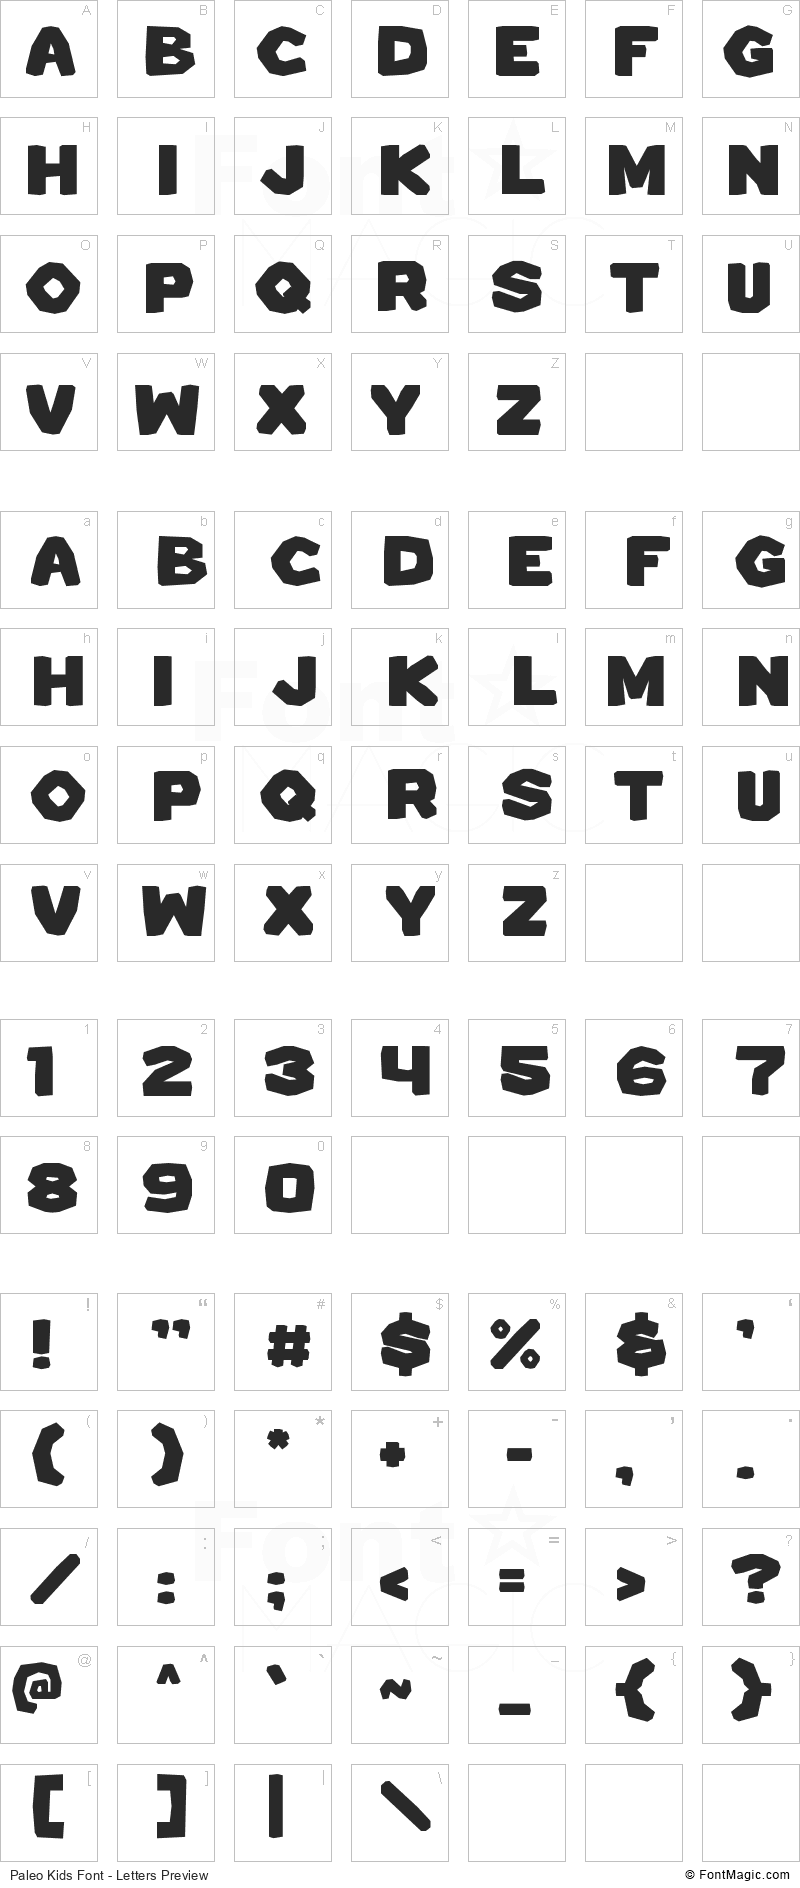 Paleo Kids Font - All Latters Preview Chart